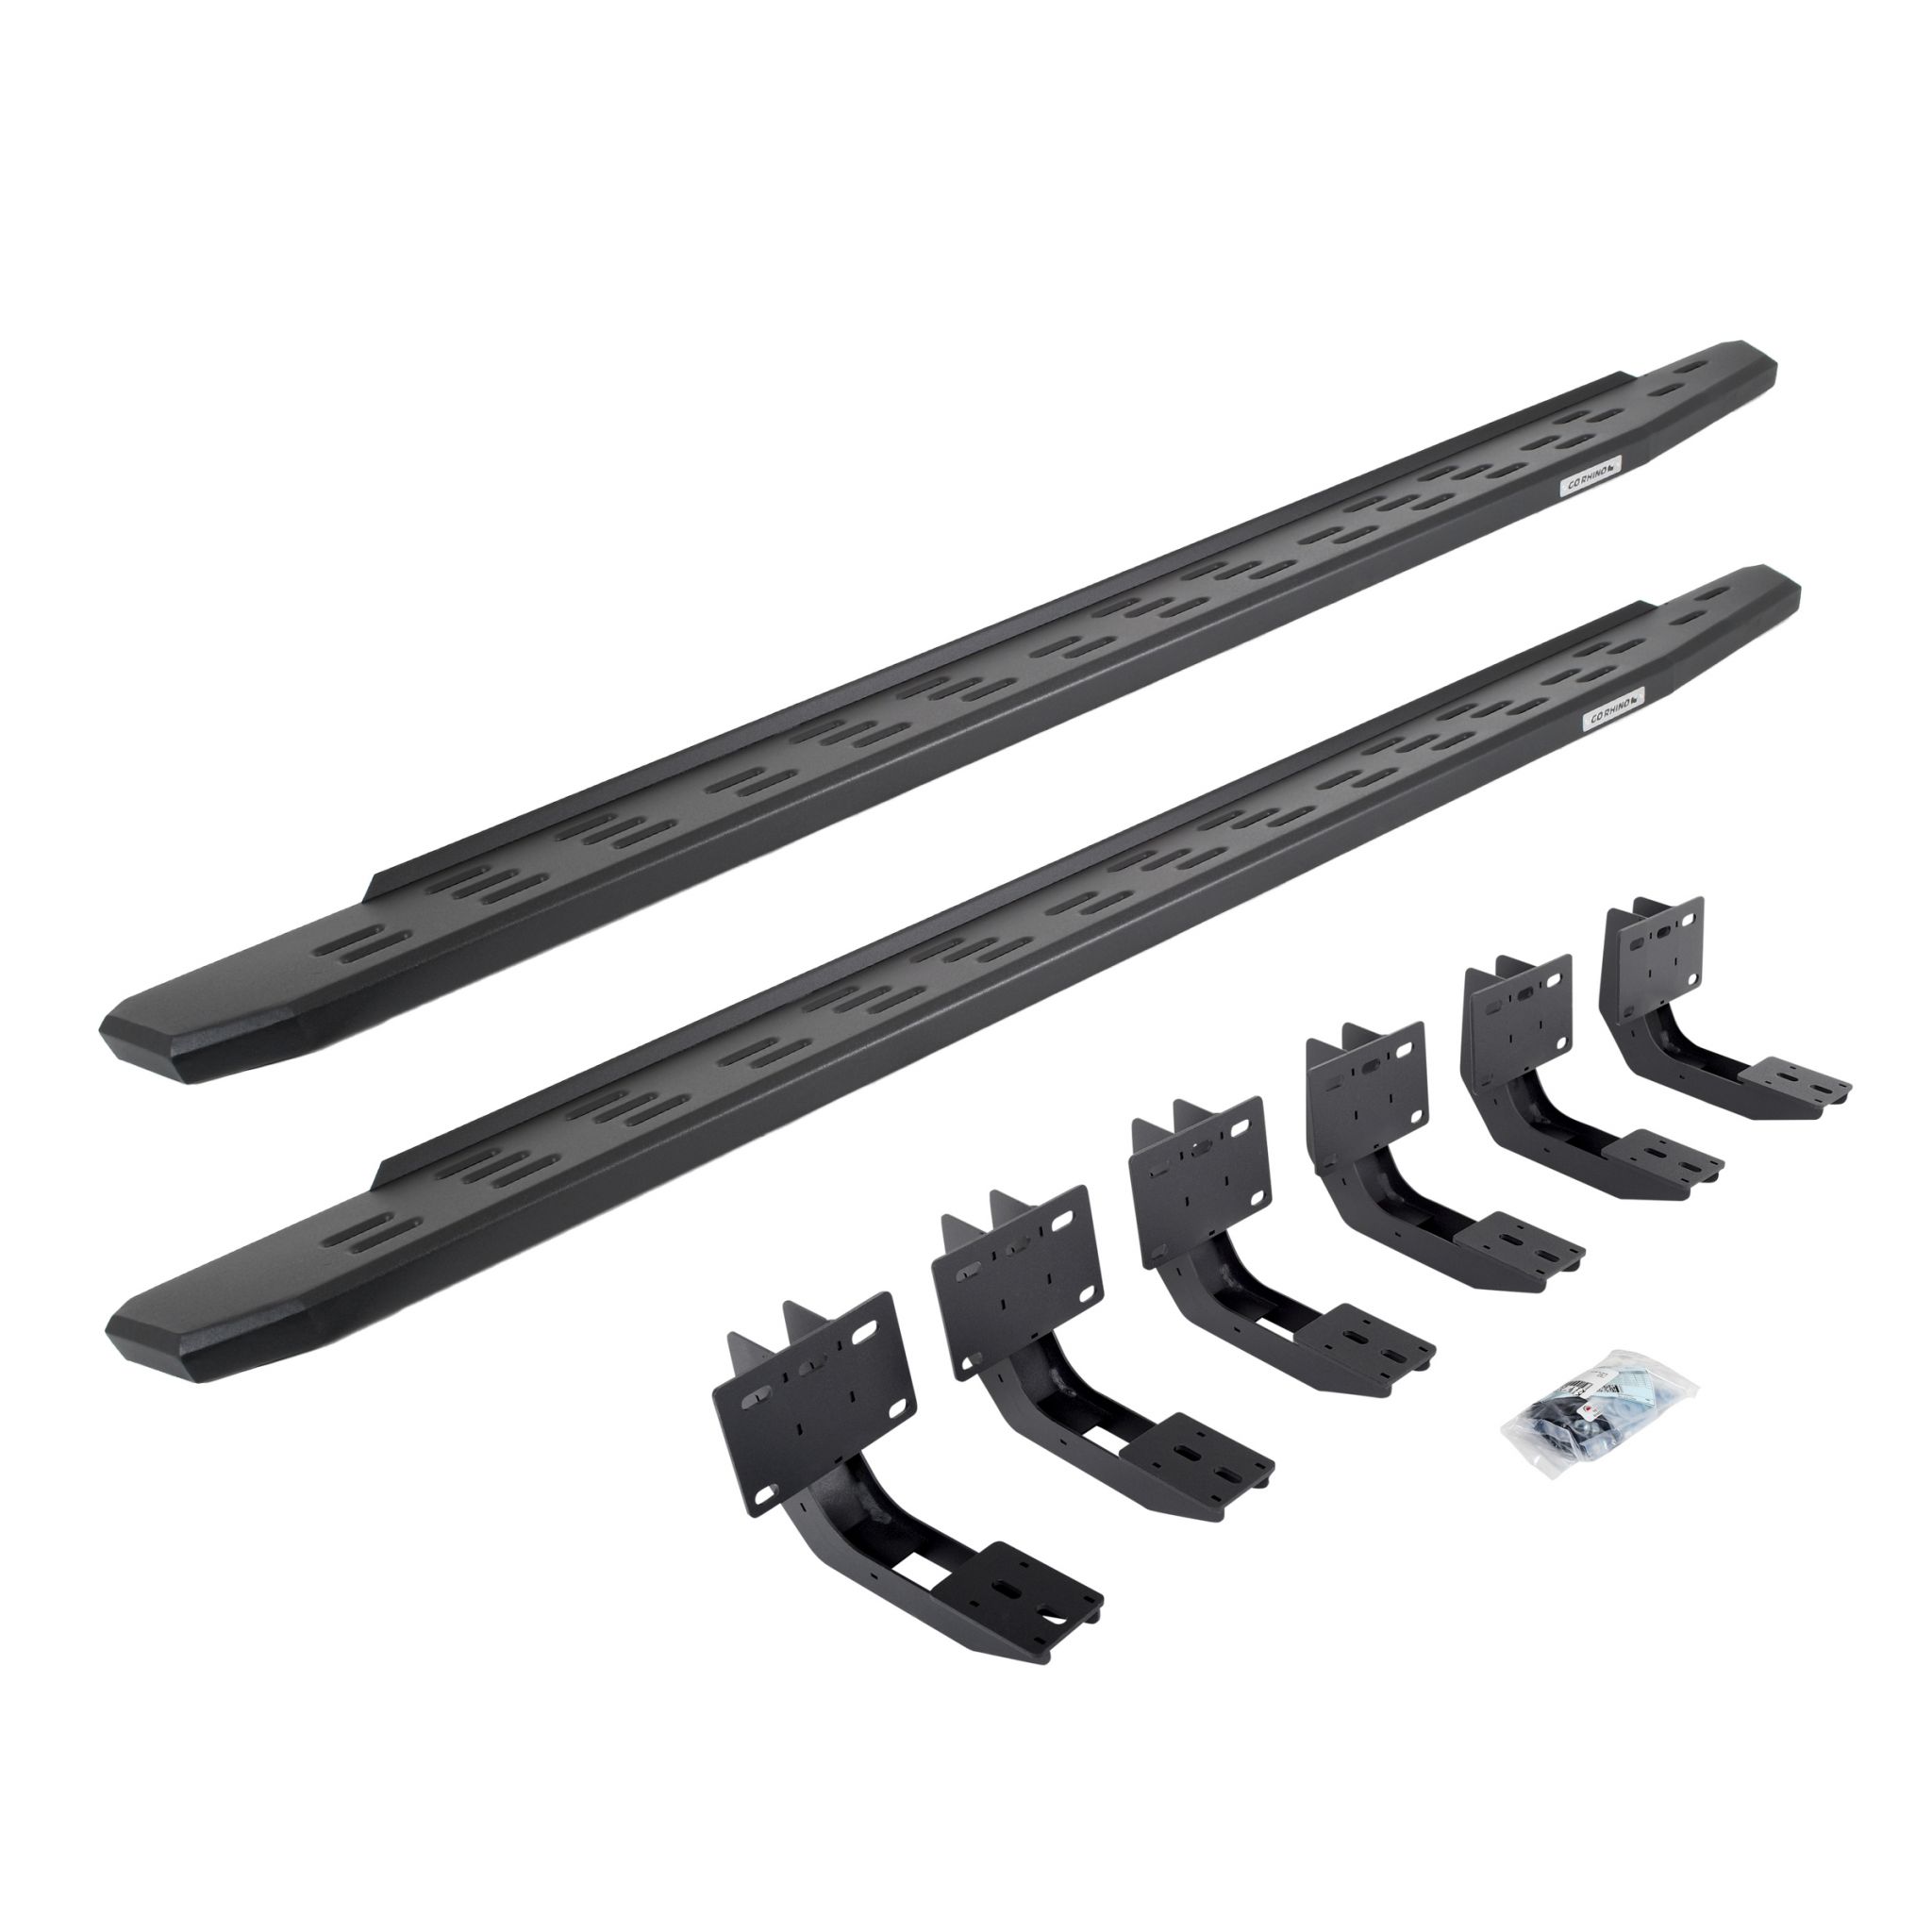 Go Rhino 69630680PC - RB30 Running Boards with Mounting Bracket Kit - Textured Black